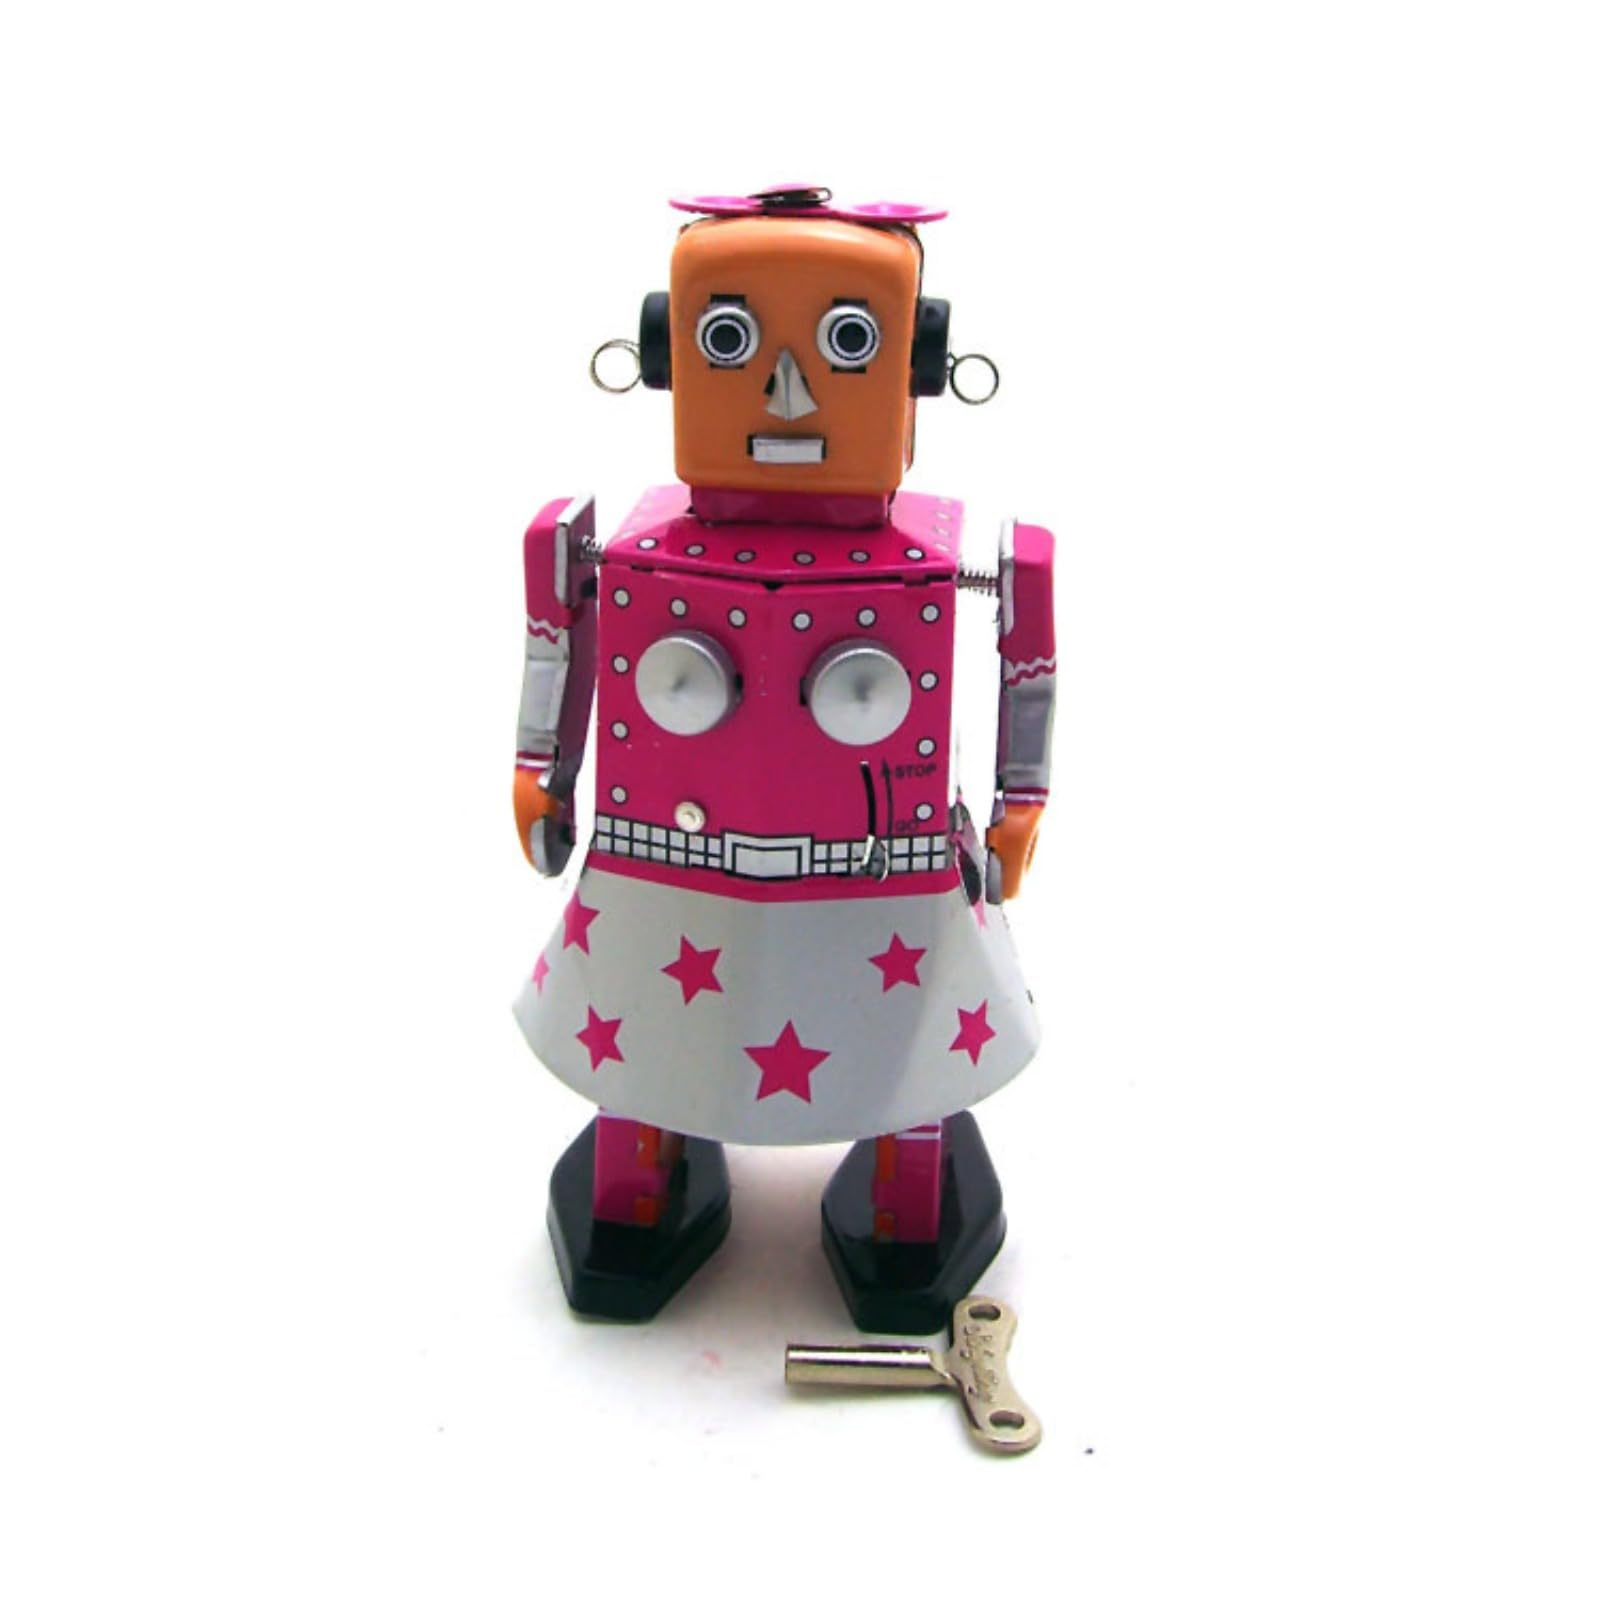 Charmgle Venus Robot Retro Tin Toy Novelty Gift Tin Robot Wind-Up Toy Party Favor Bar Clothing Shop Home Decoration Adult Collection